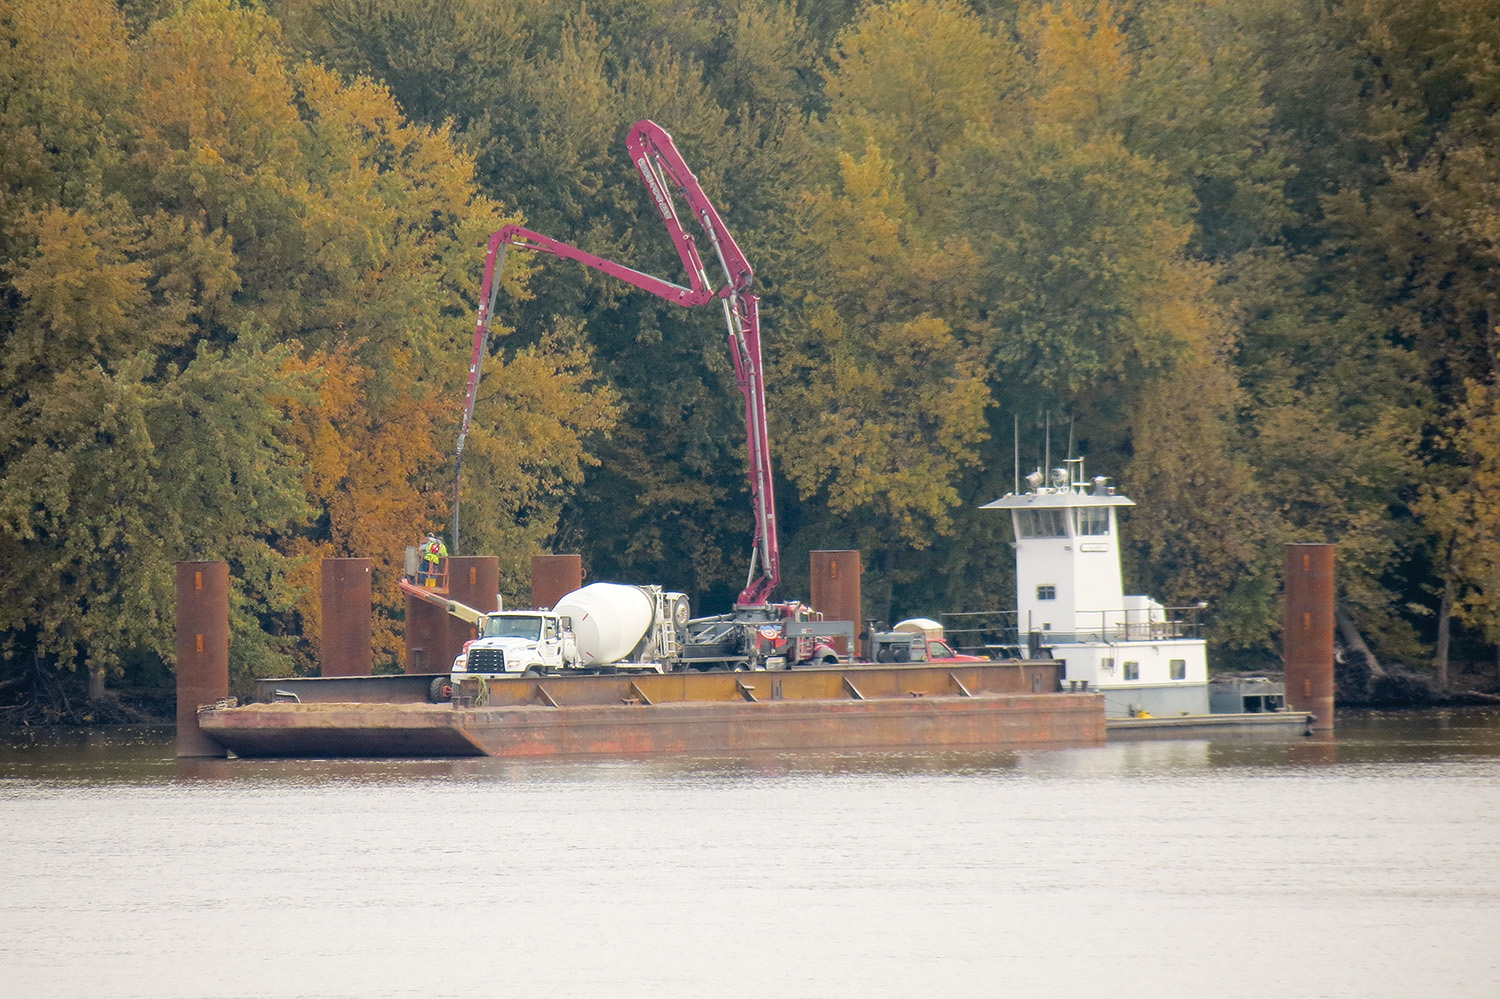 The towboat Ajay pushing a deck barge and crane from Wayne B. Smith Inc. (WBS), which pours concrete into four steel piers for the SIMCO grain terminal in Pike County, Ill., before they were capped with welded steel plates. The pouring operation took a day. WBS also provided placement of the 42 D-rings on the mooring cells. The next step is building a loadout tower on top of the middle four cells, said Greg Dolbeare.